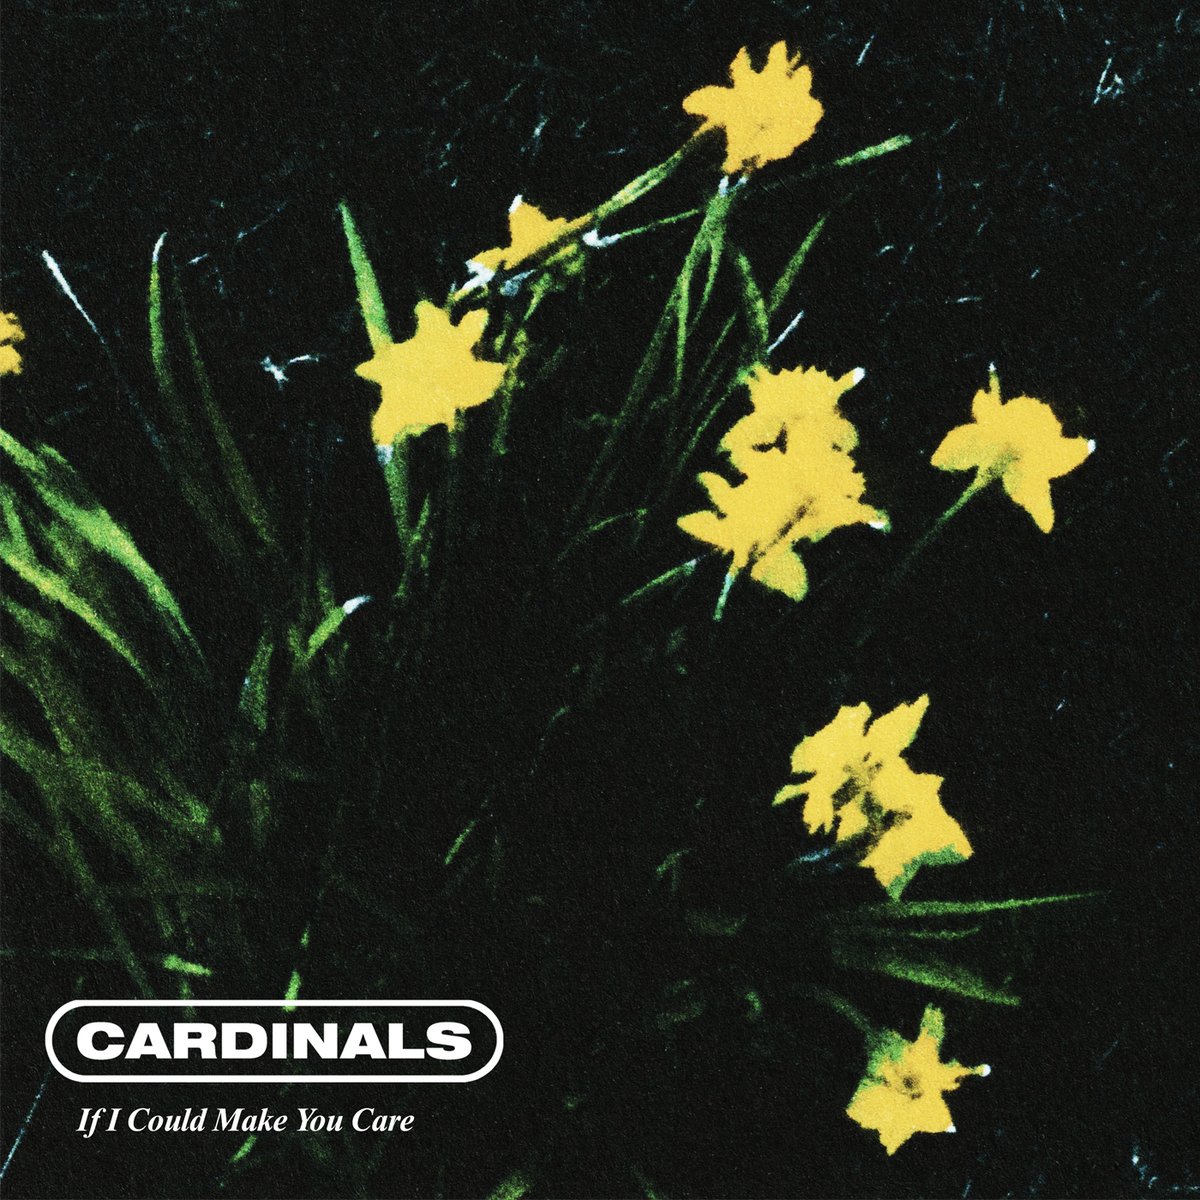 So Young Records | Cardinals' have announced their debut self-titled EP is coming 7th June. ‘If I Could Make You Care’ is out now.